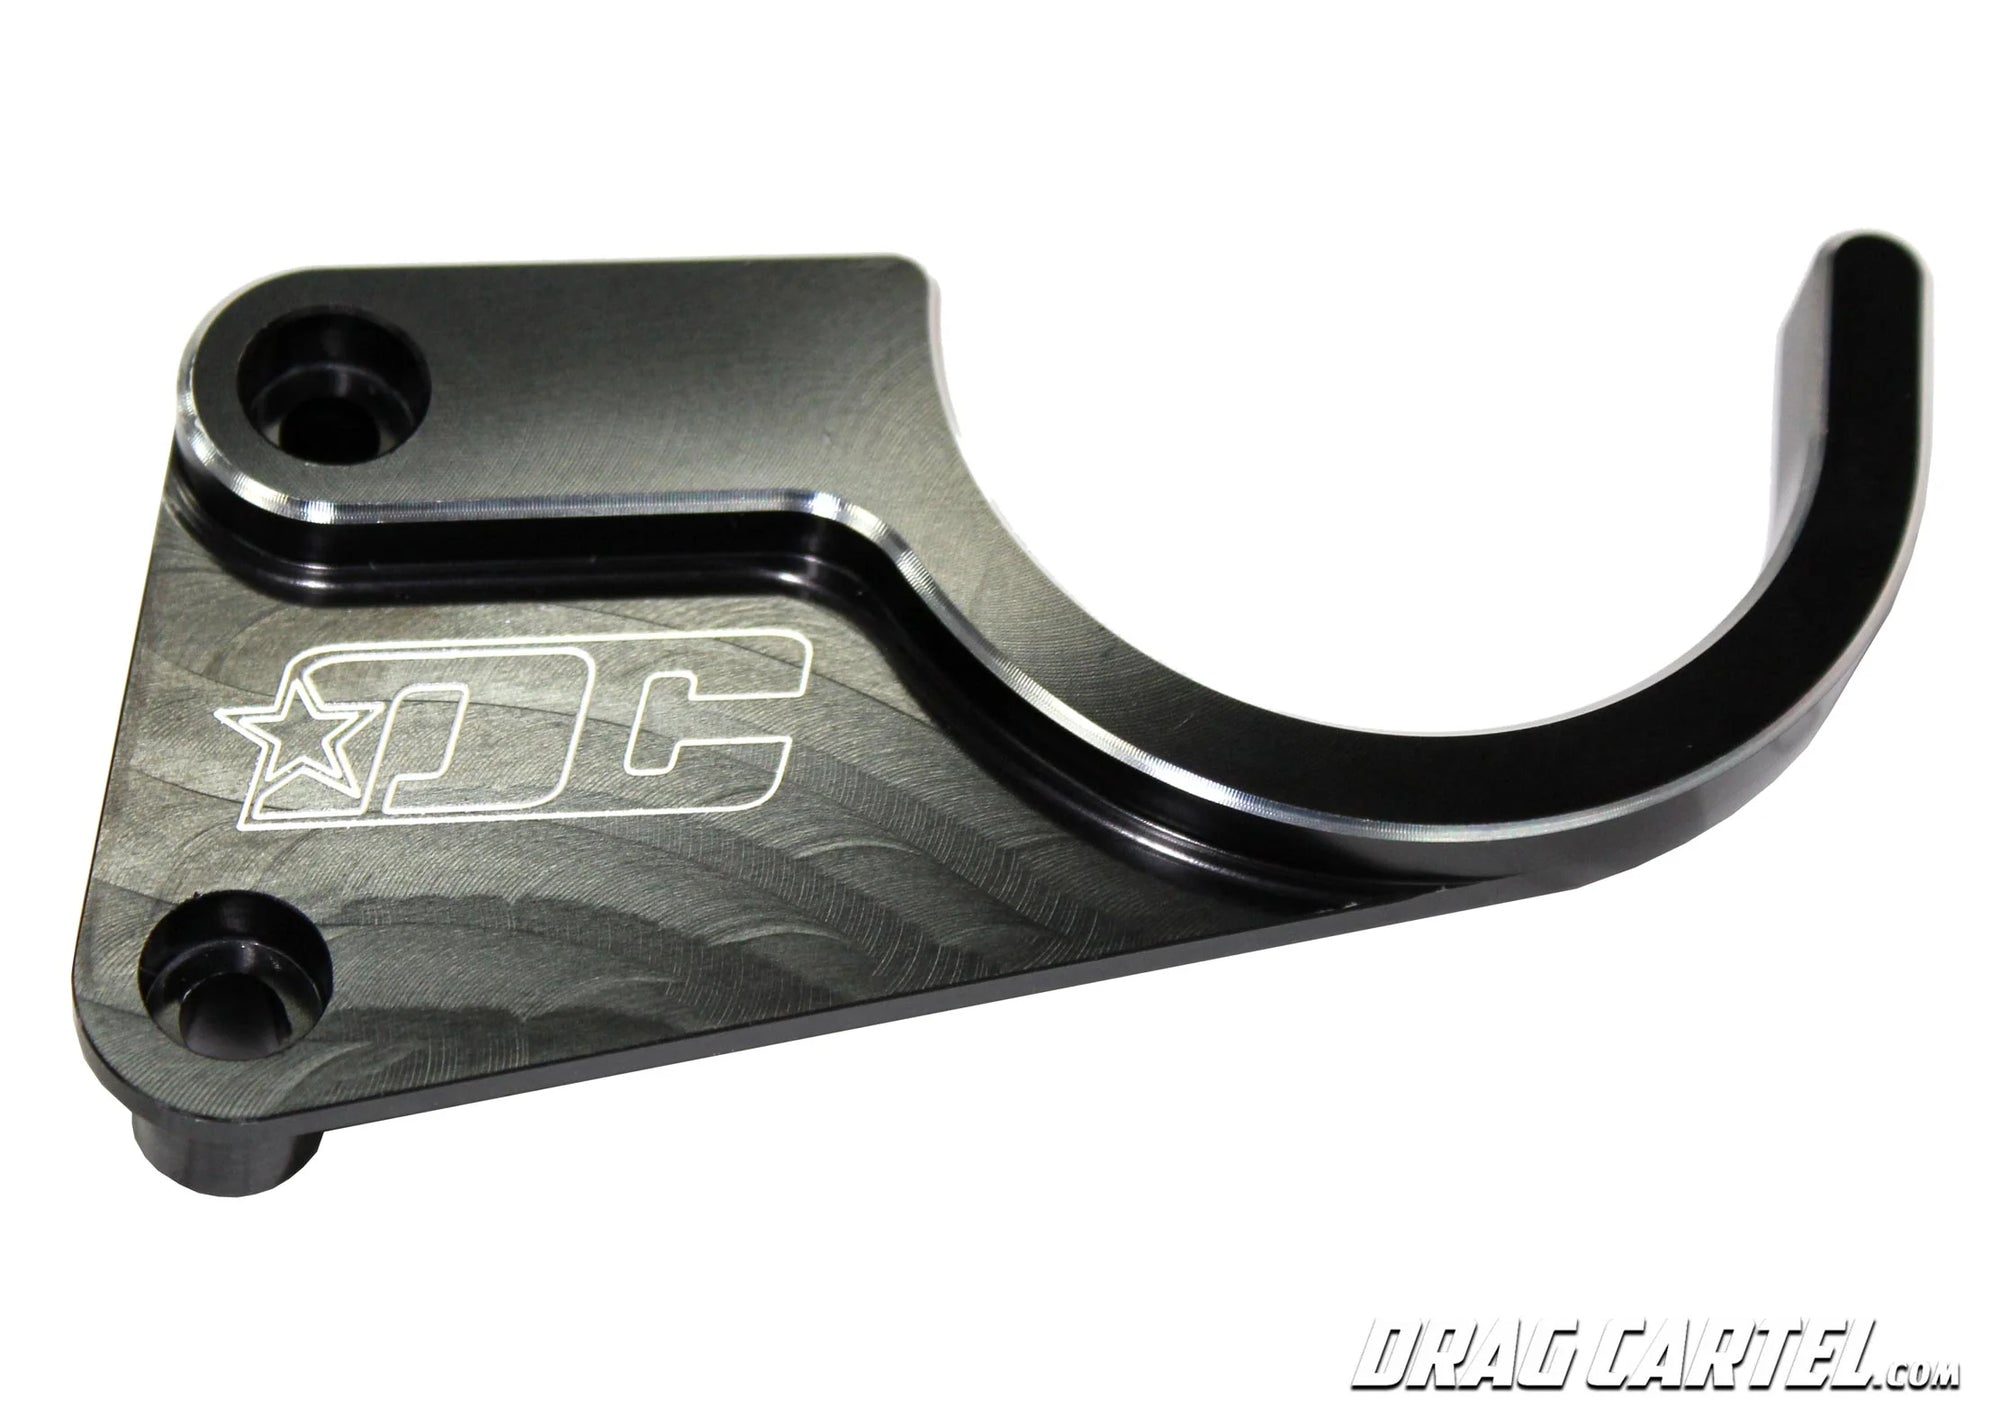 Drag Cartel Lower Timing Chain Guide - K-Series